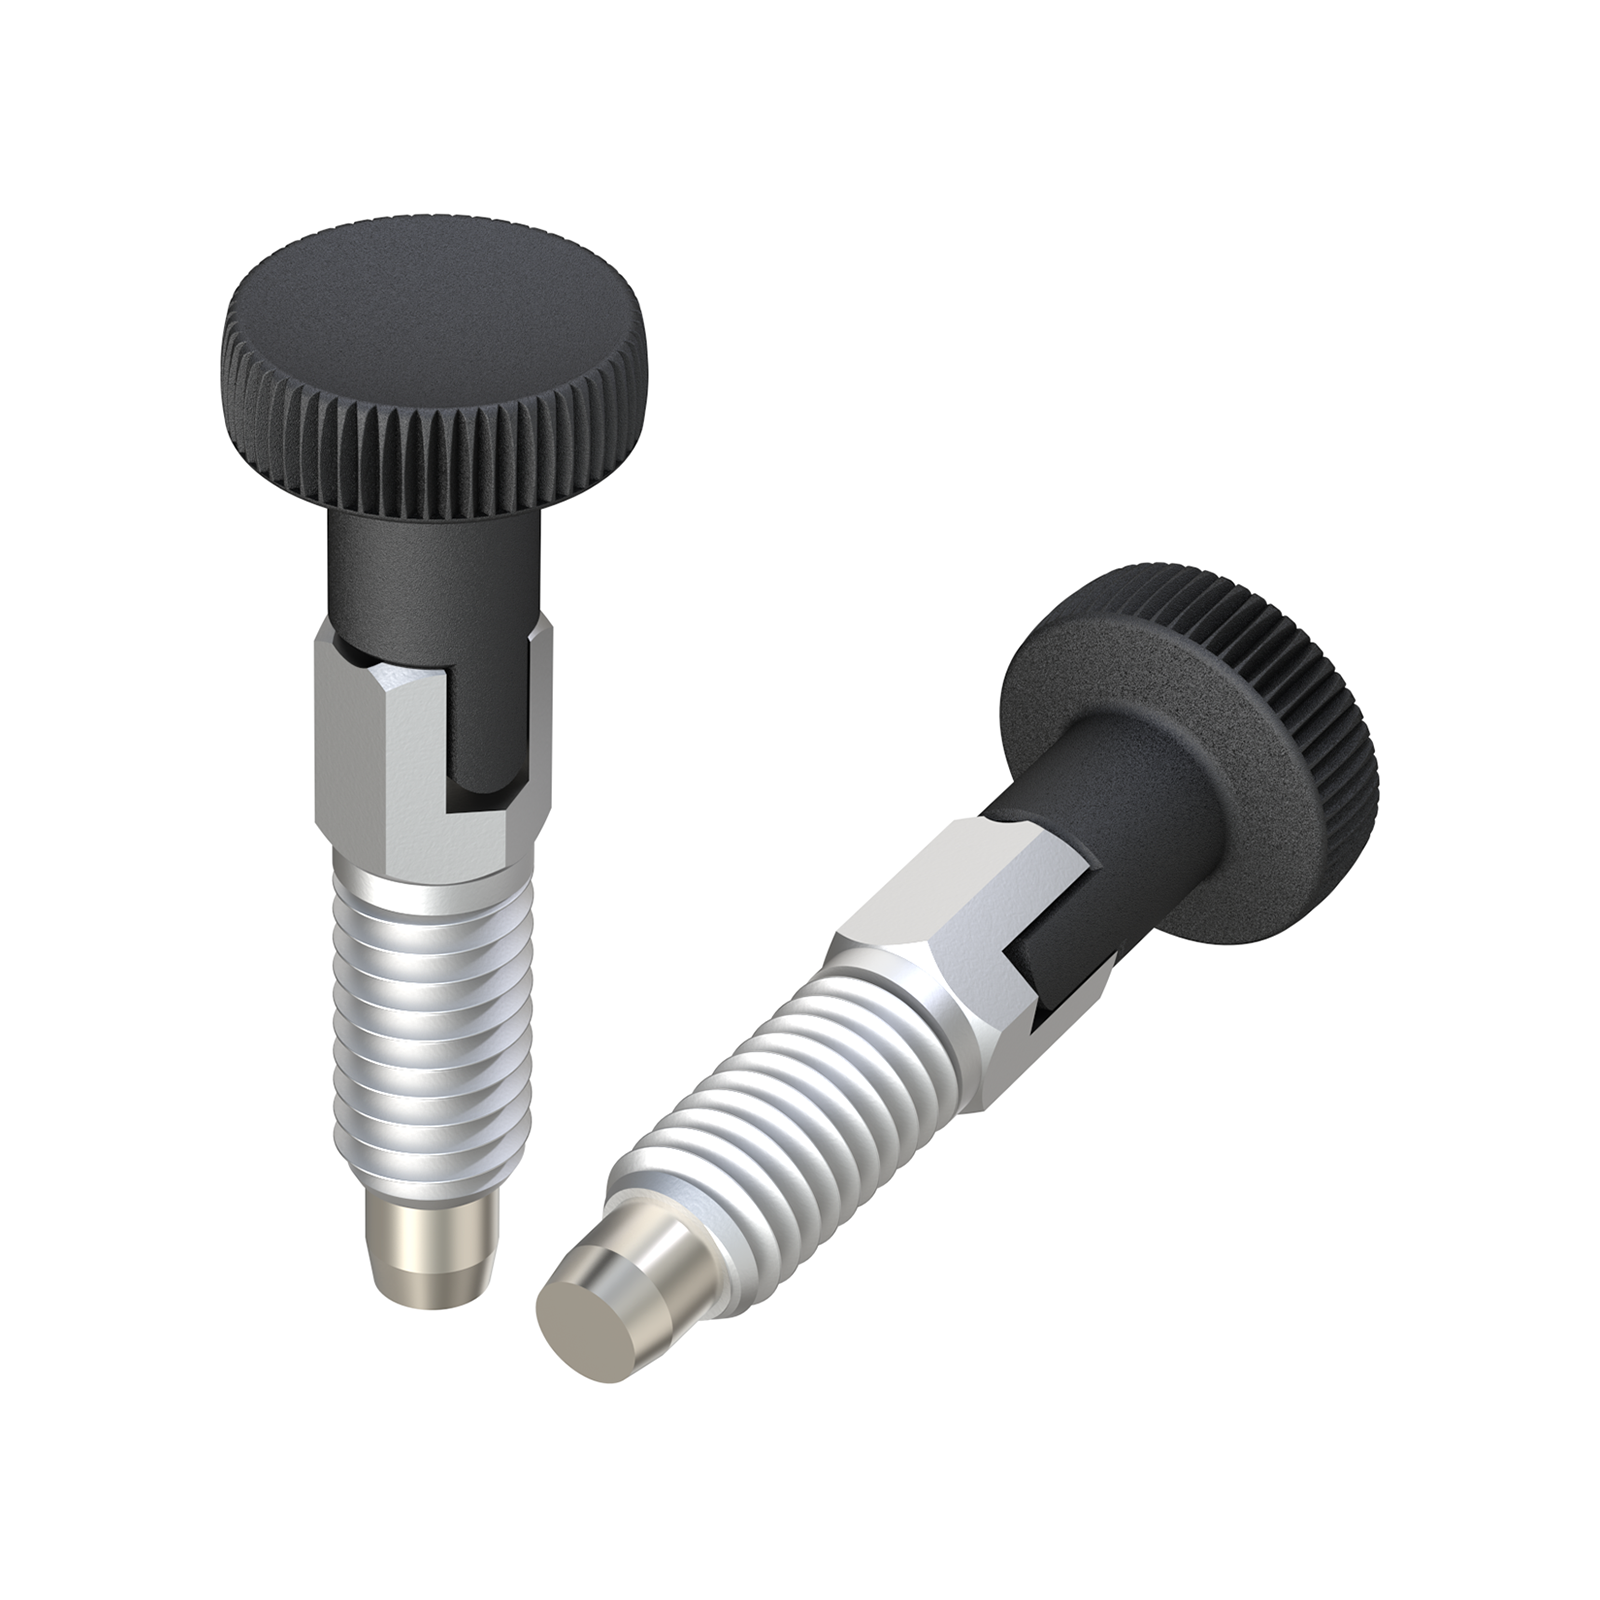 Index bolt with knurled head with stop